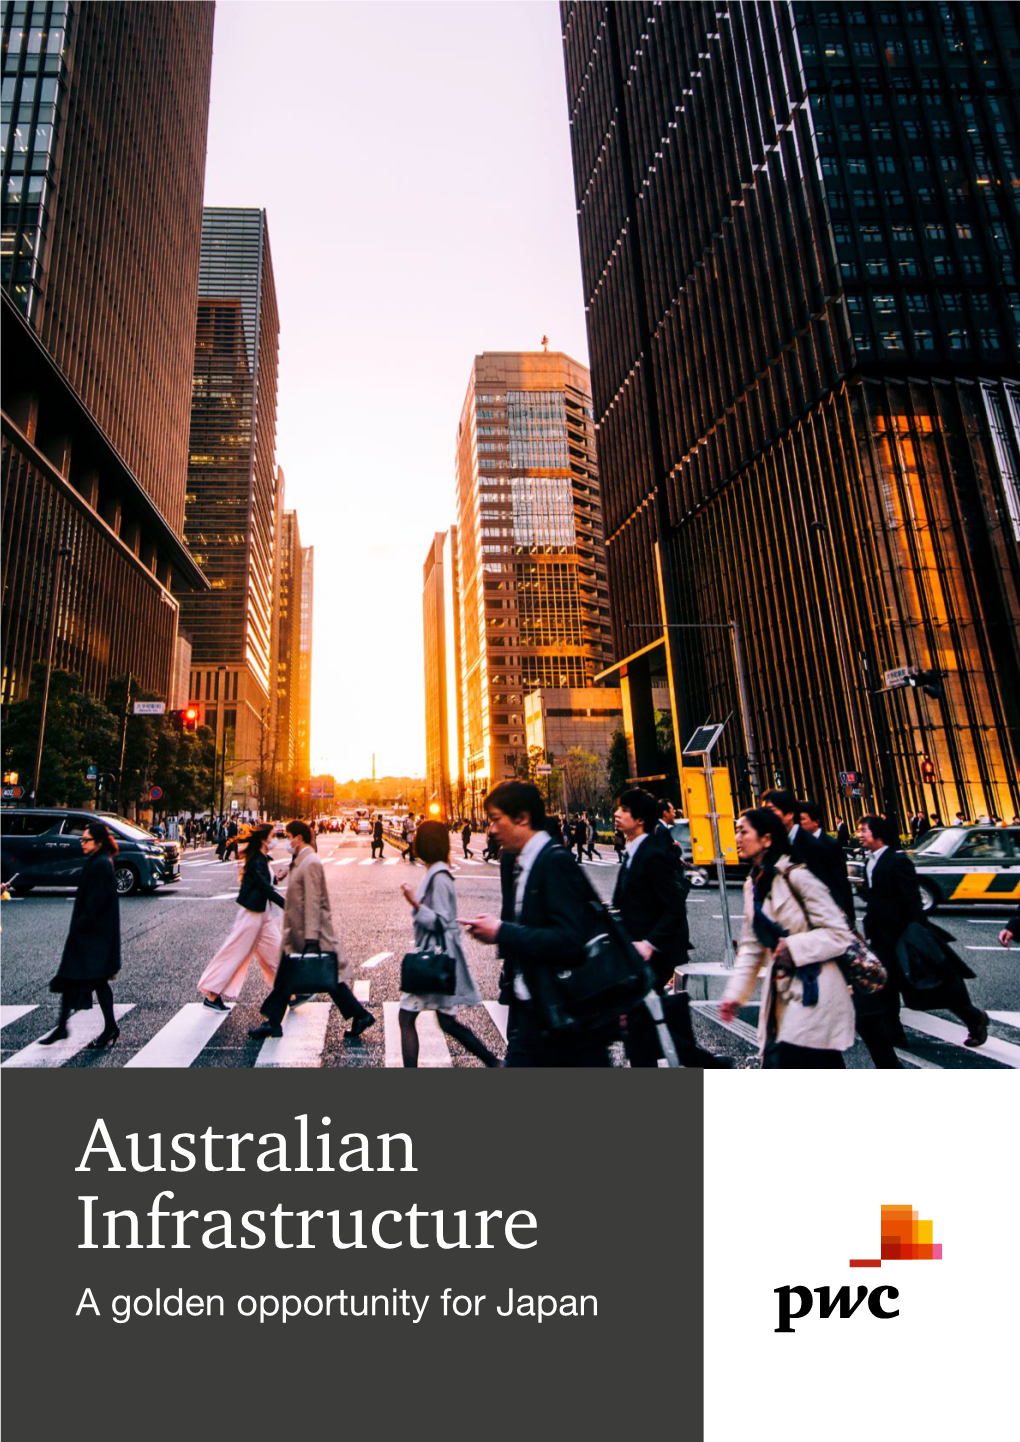 Download the Report Australian Infrastructure – a Golden Opportunity for Japan